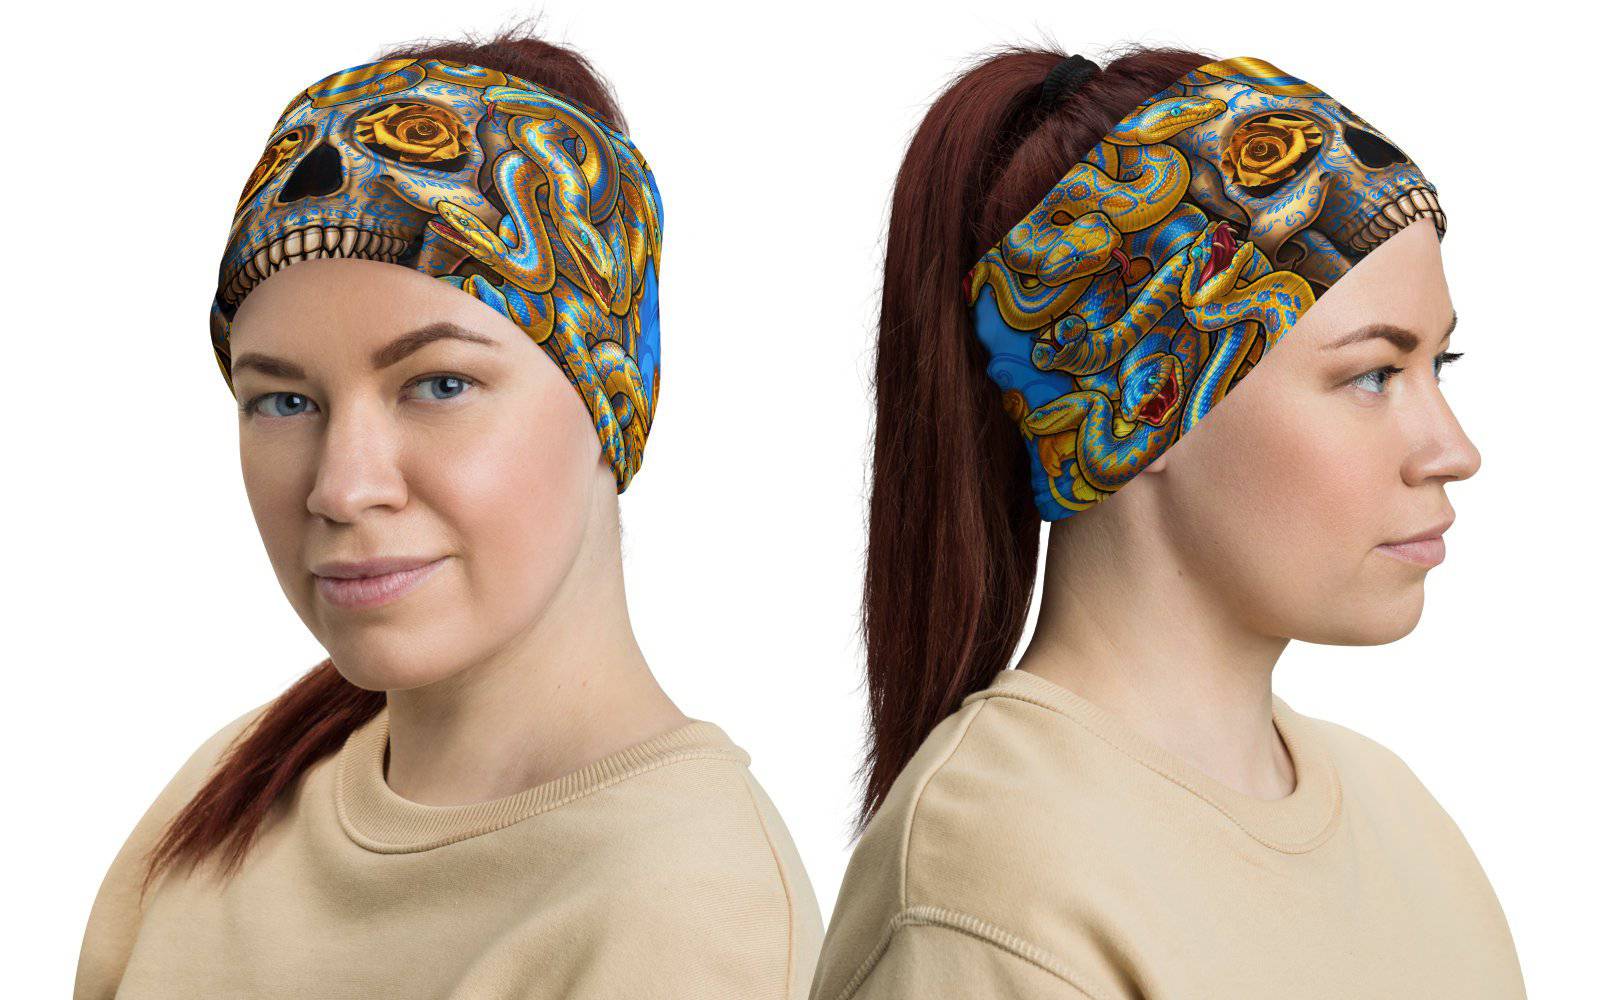 Medusa Neck Gaiter, Face Mask, Head Covering, Snakes Headband, Skull, Fantasy Outfit - Cyan & Gold, 2 Face Options - Abysm Internal